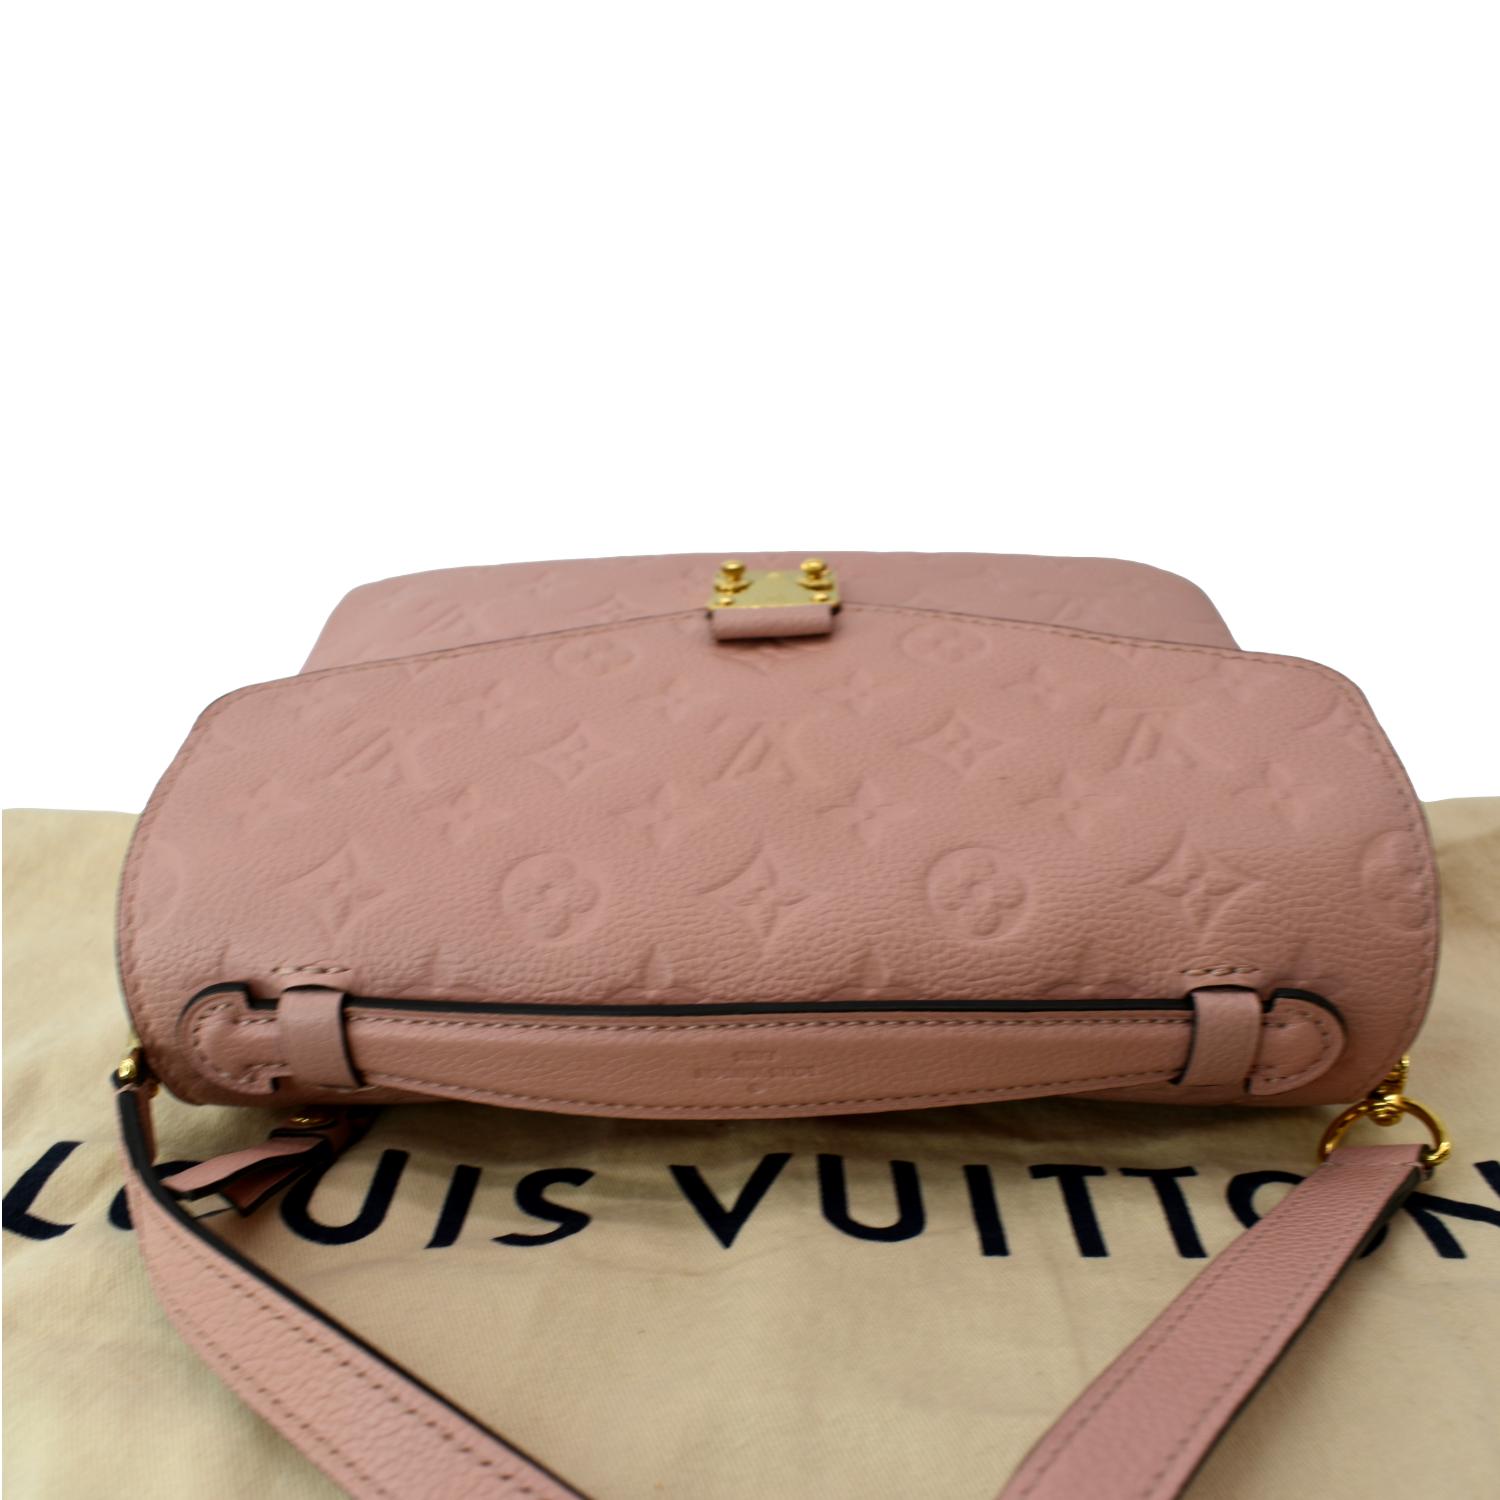 Louis Vuitton - Authenticated Metis Handbag - Leather Pink Plain for Women, Very Good Condition